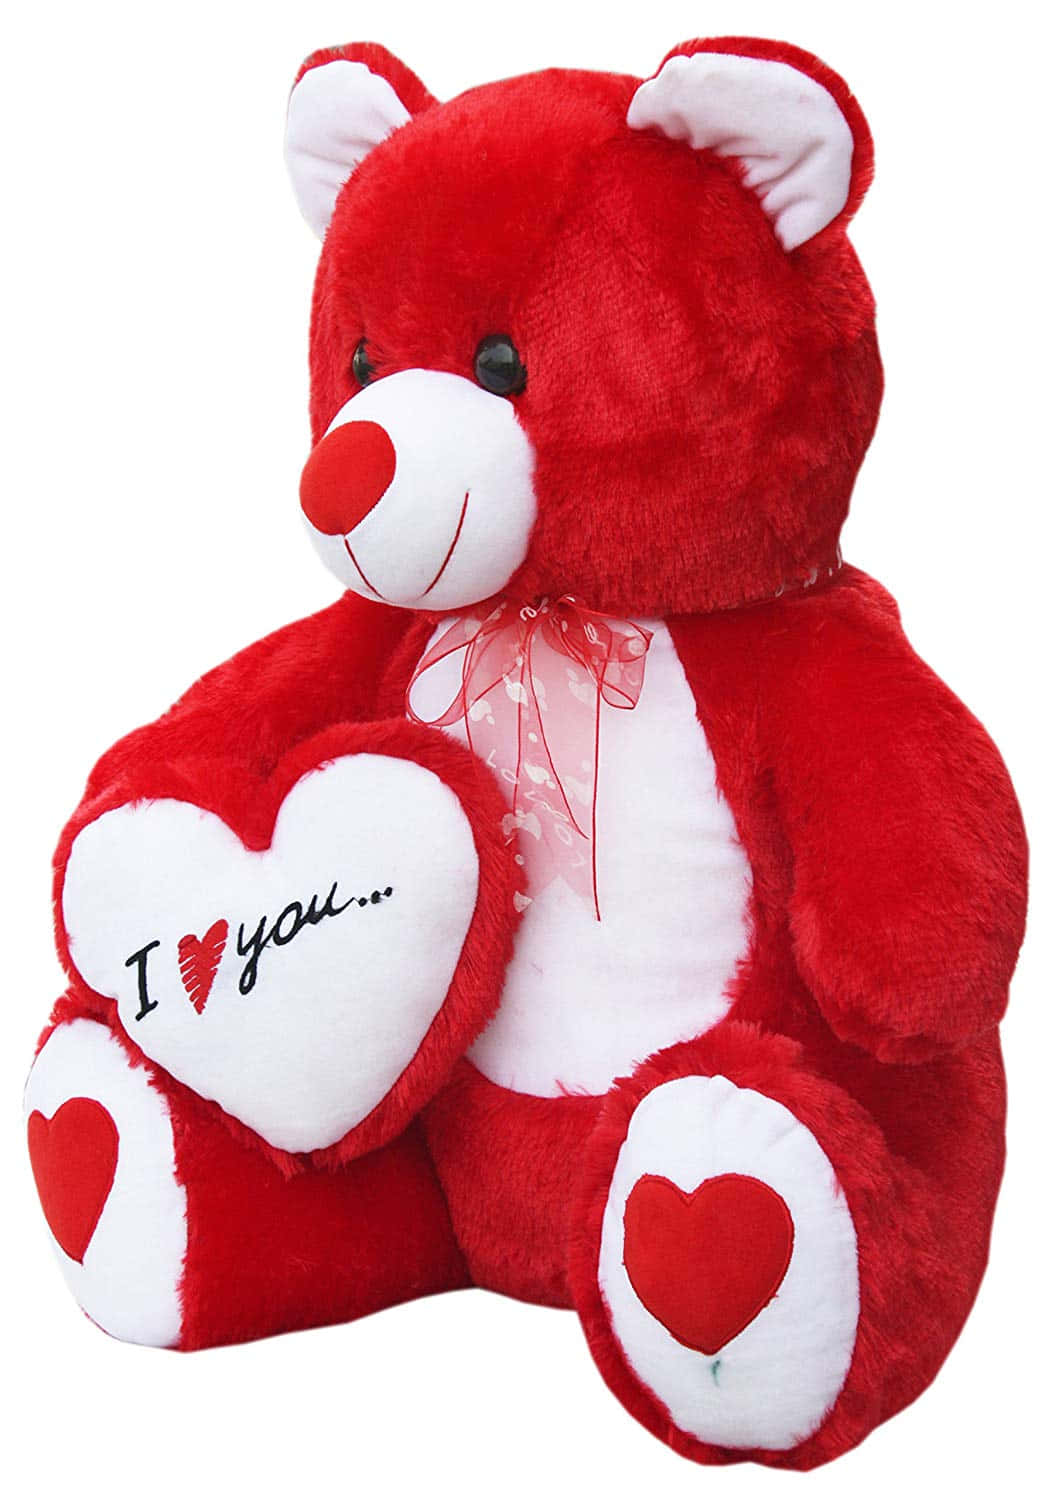 "I LOVE YOU" Teddy Bear Picture